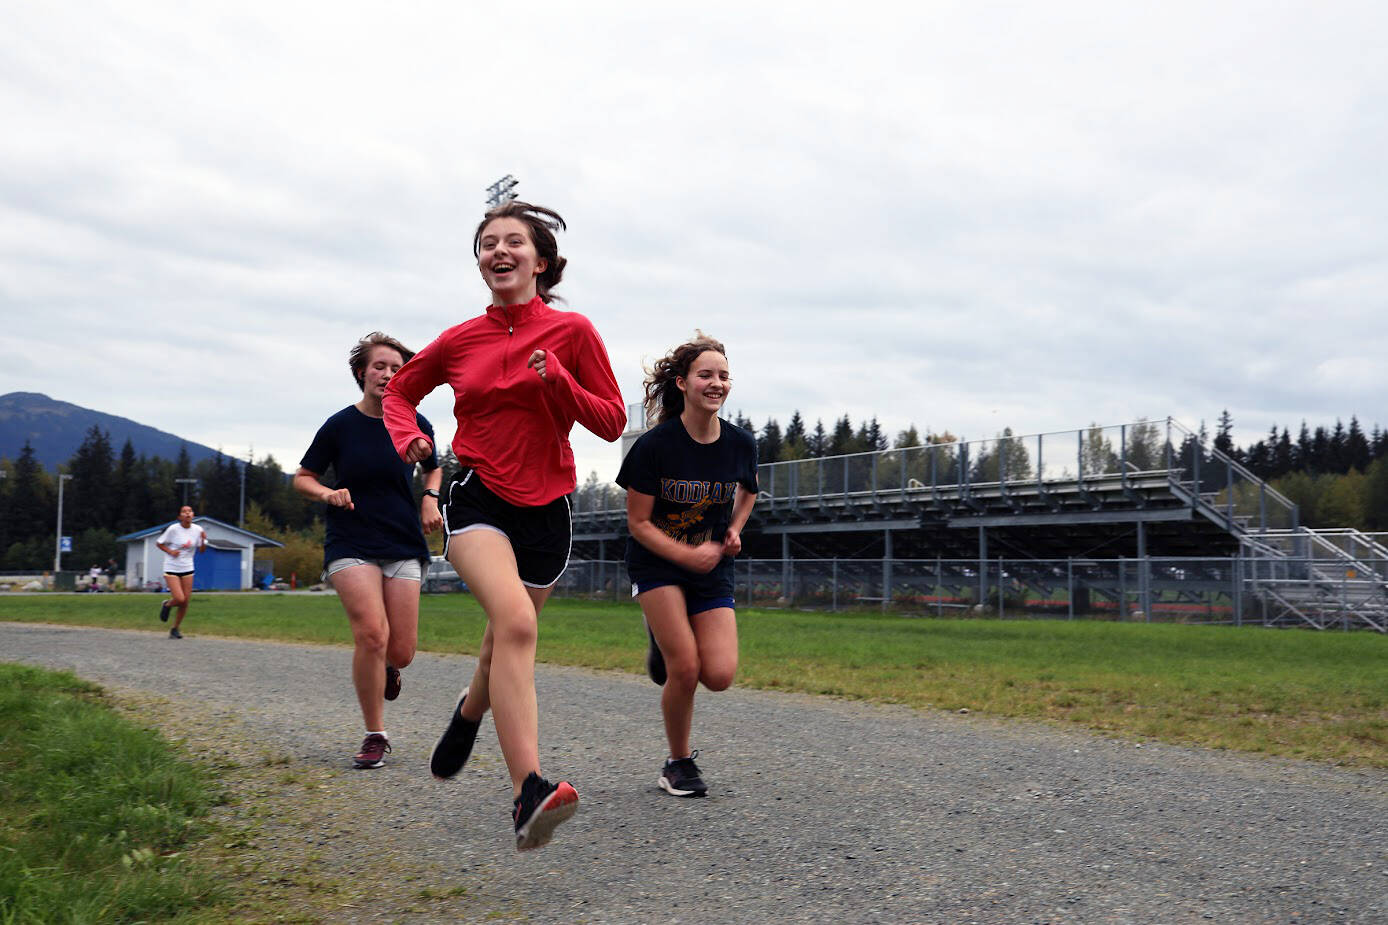 From left to right, Thunder Mountain High School cross country runners Randy Stichert, Piper Blackgoat and Kobe Yturbe finish up their run at cross country practice on Monday afternoon. (Clarise Larson / Juneau Empire)